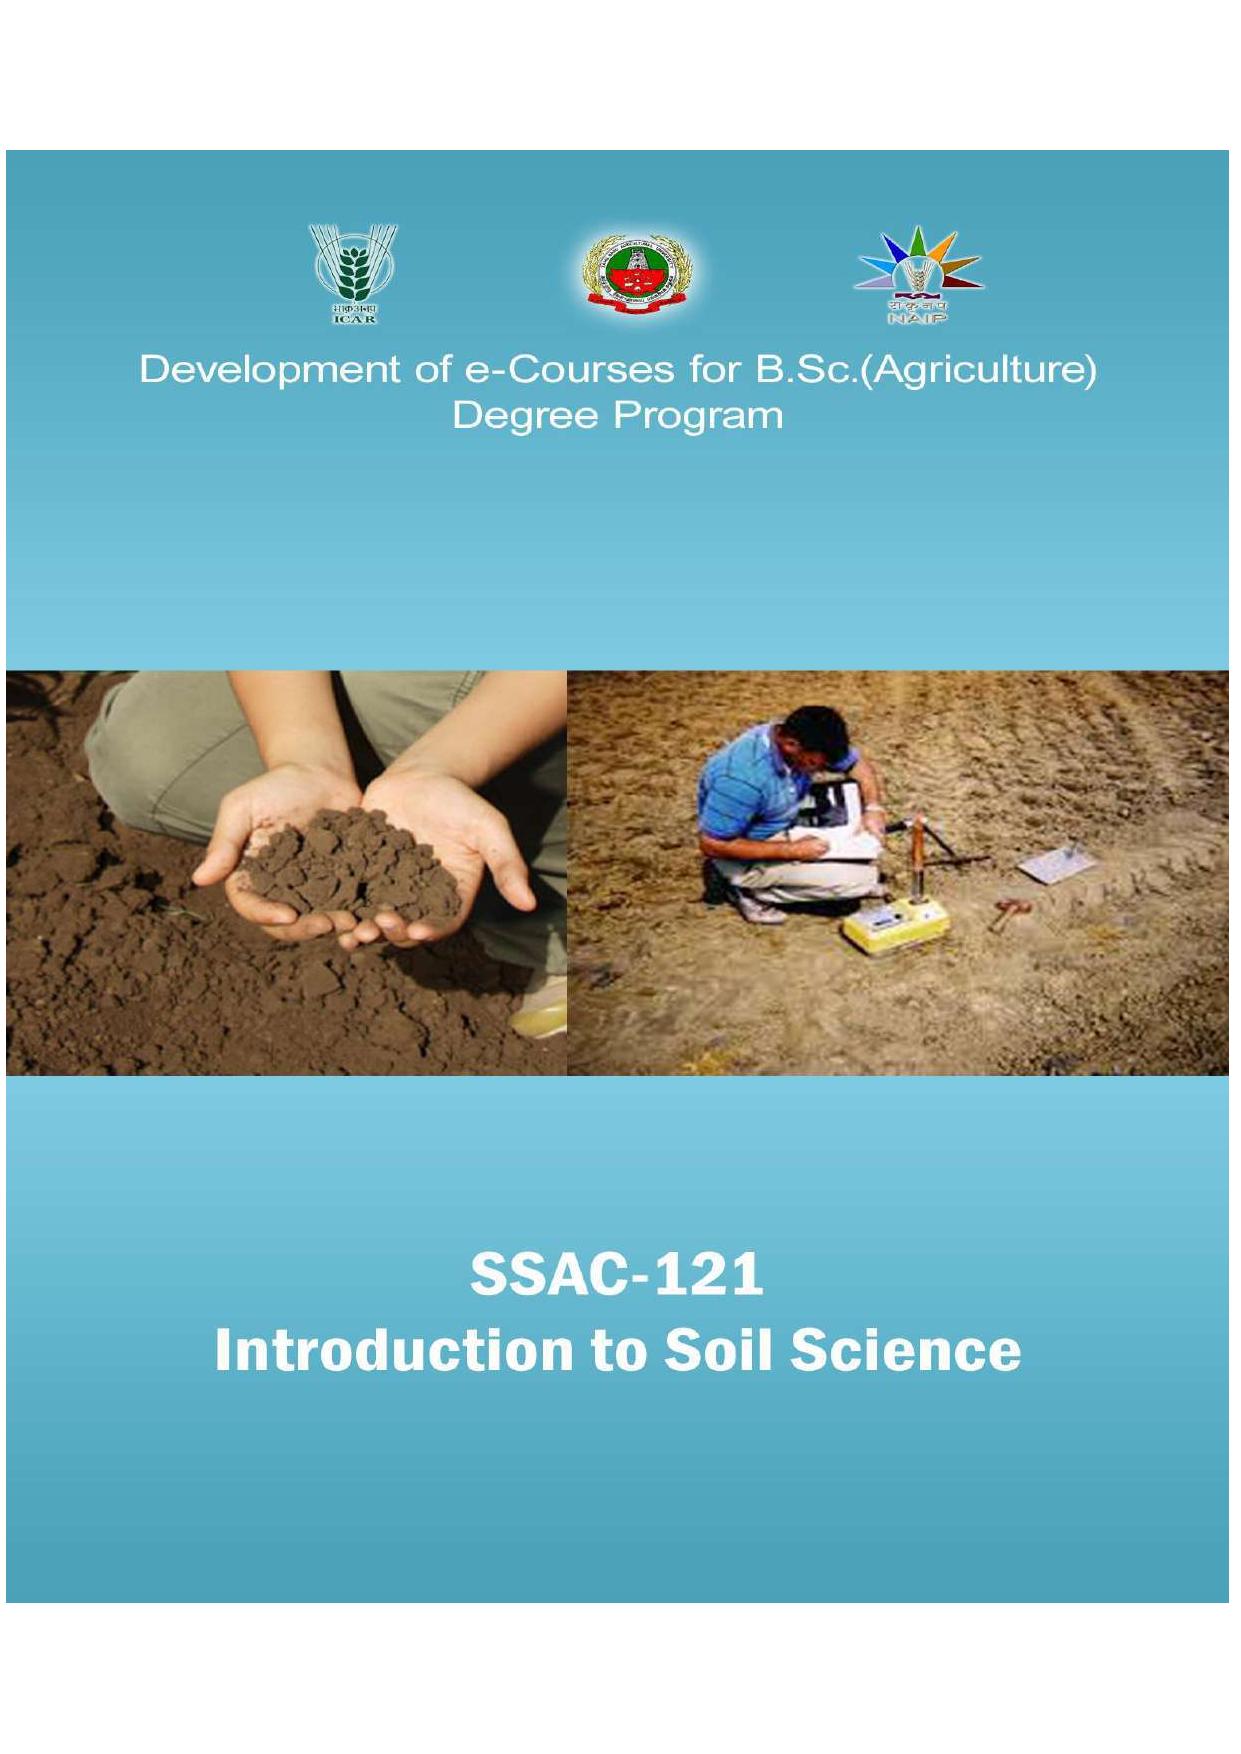 INTRODUCTION TO SOIL SCIENCE